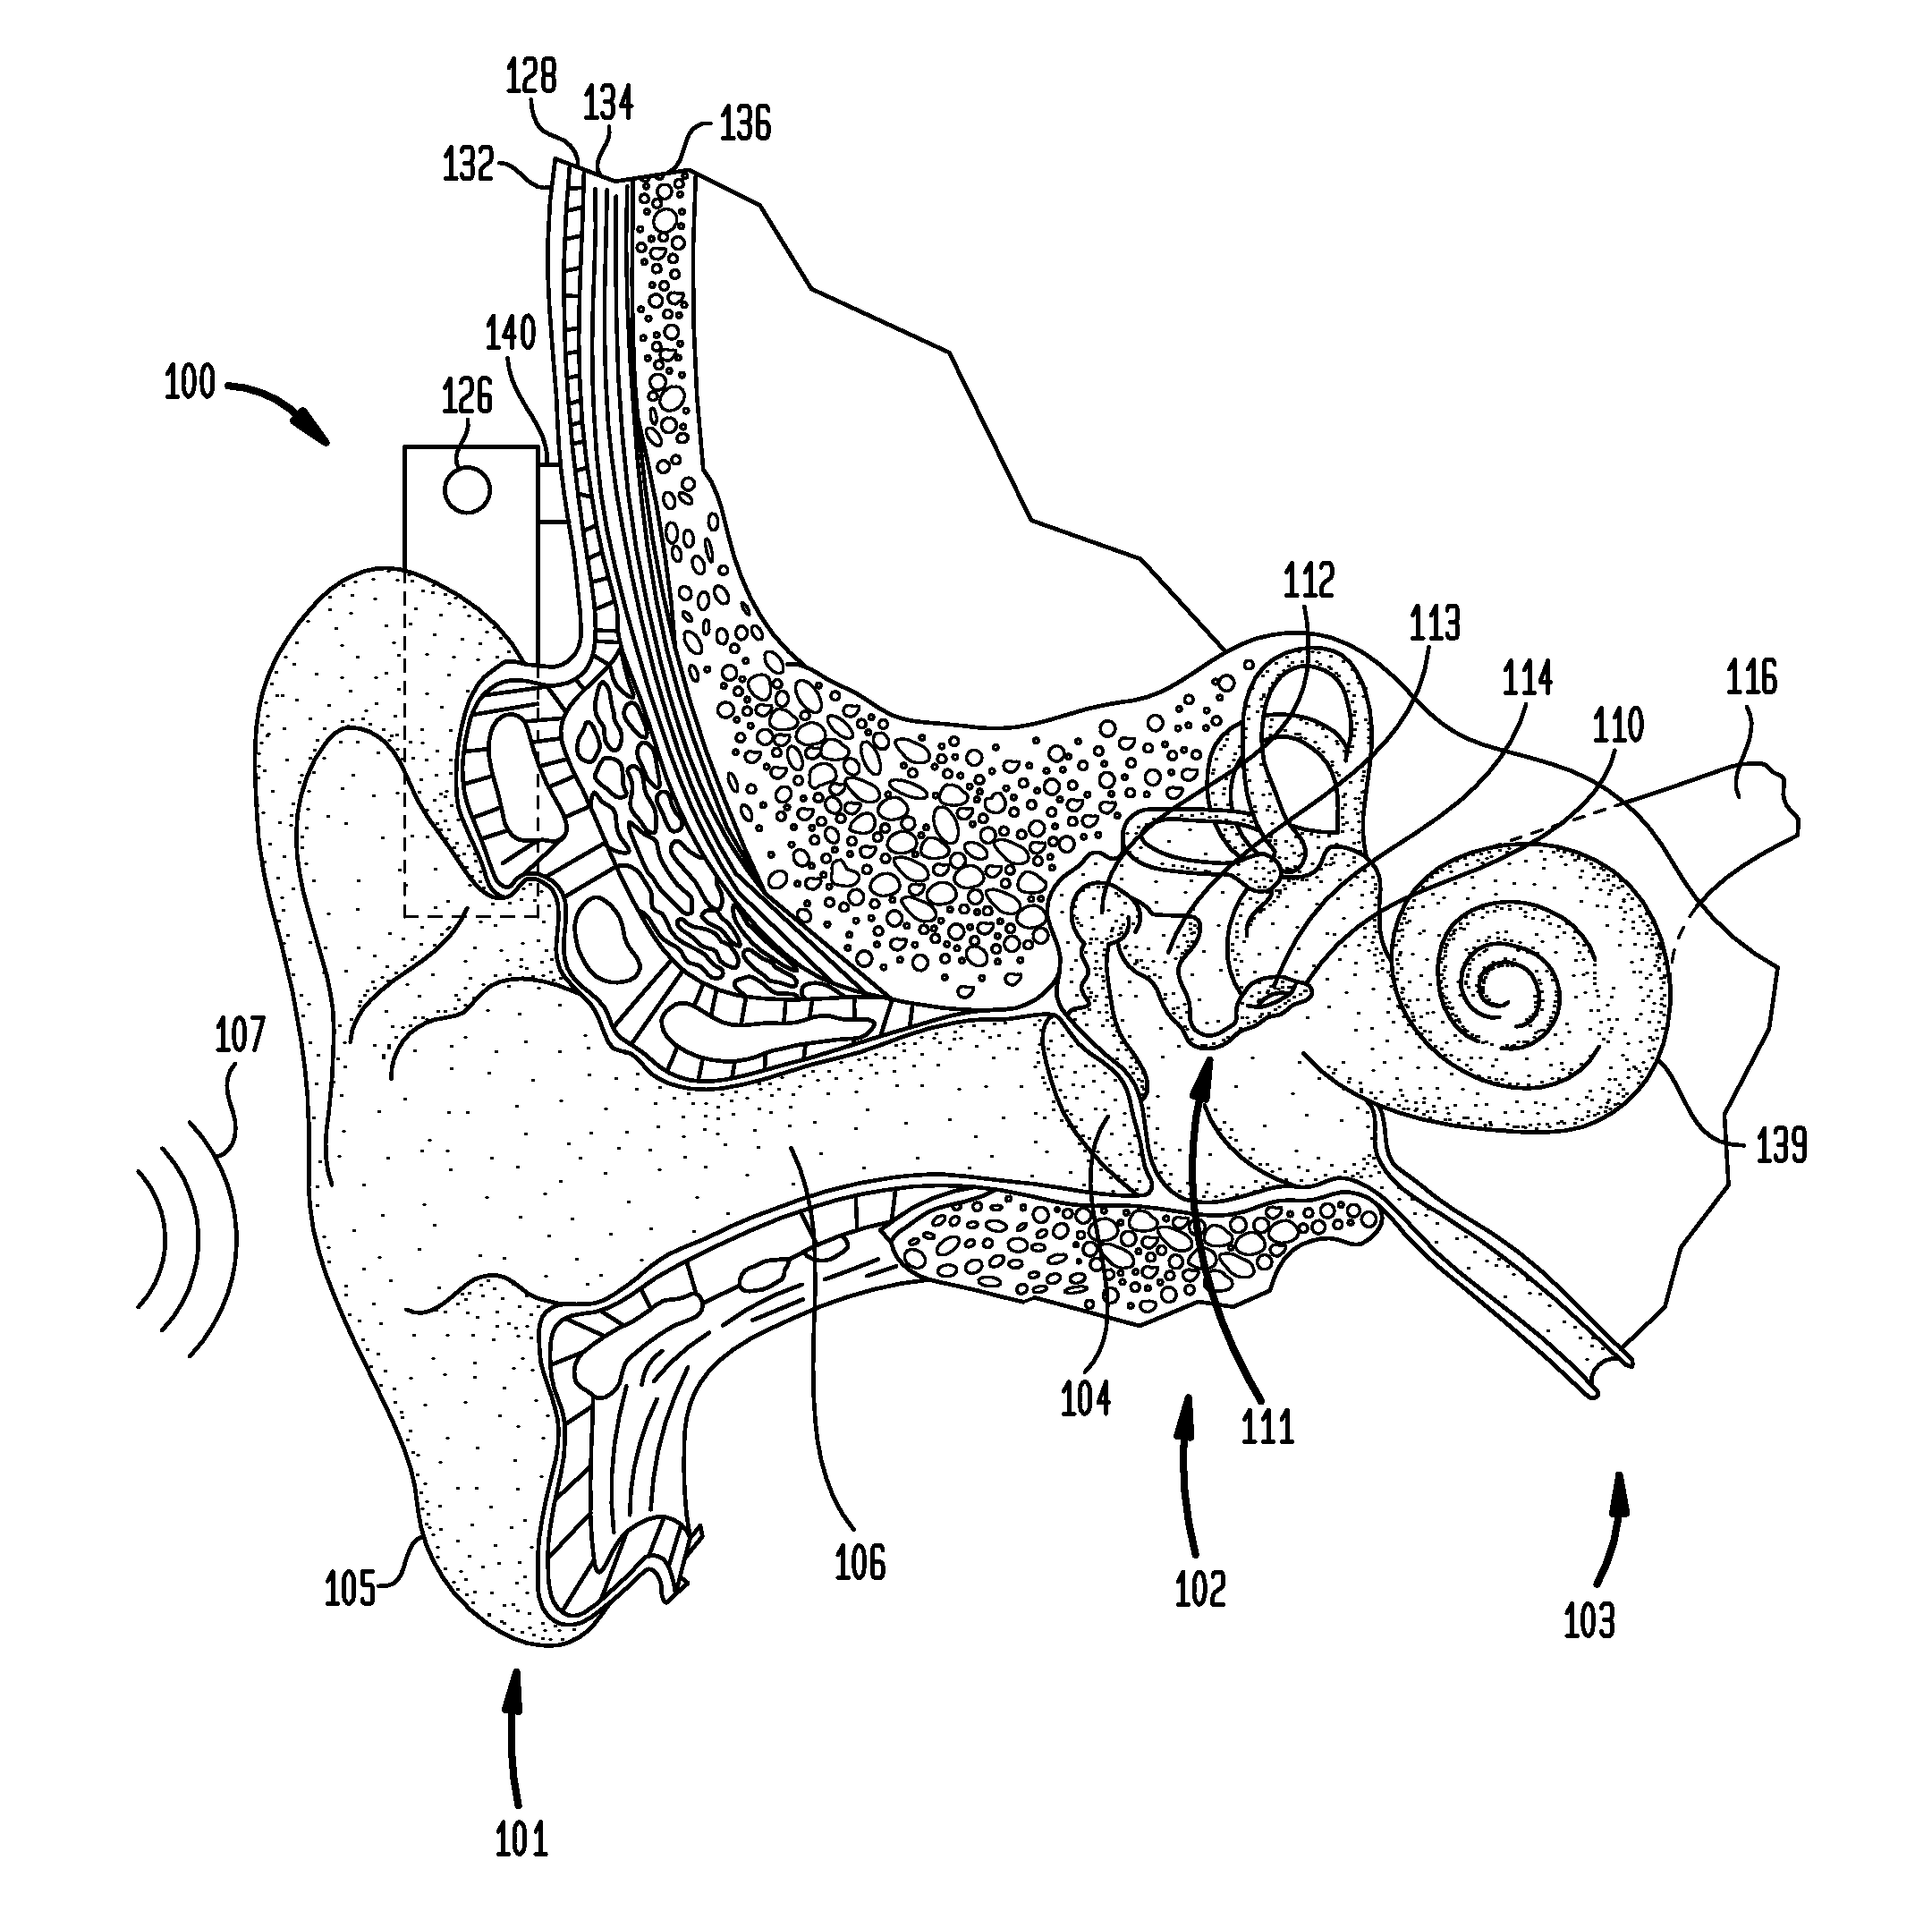 Bone conduction device including a balanced electromagnetic actuator having radial and axial air gaps